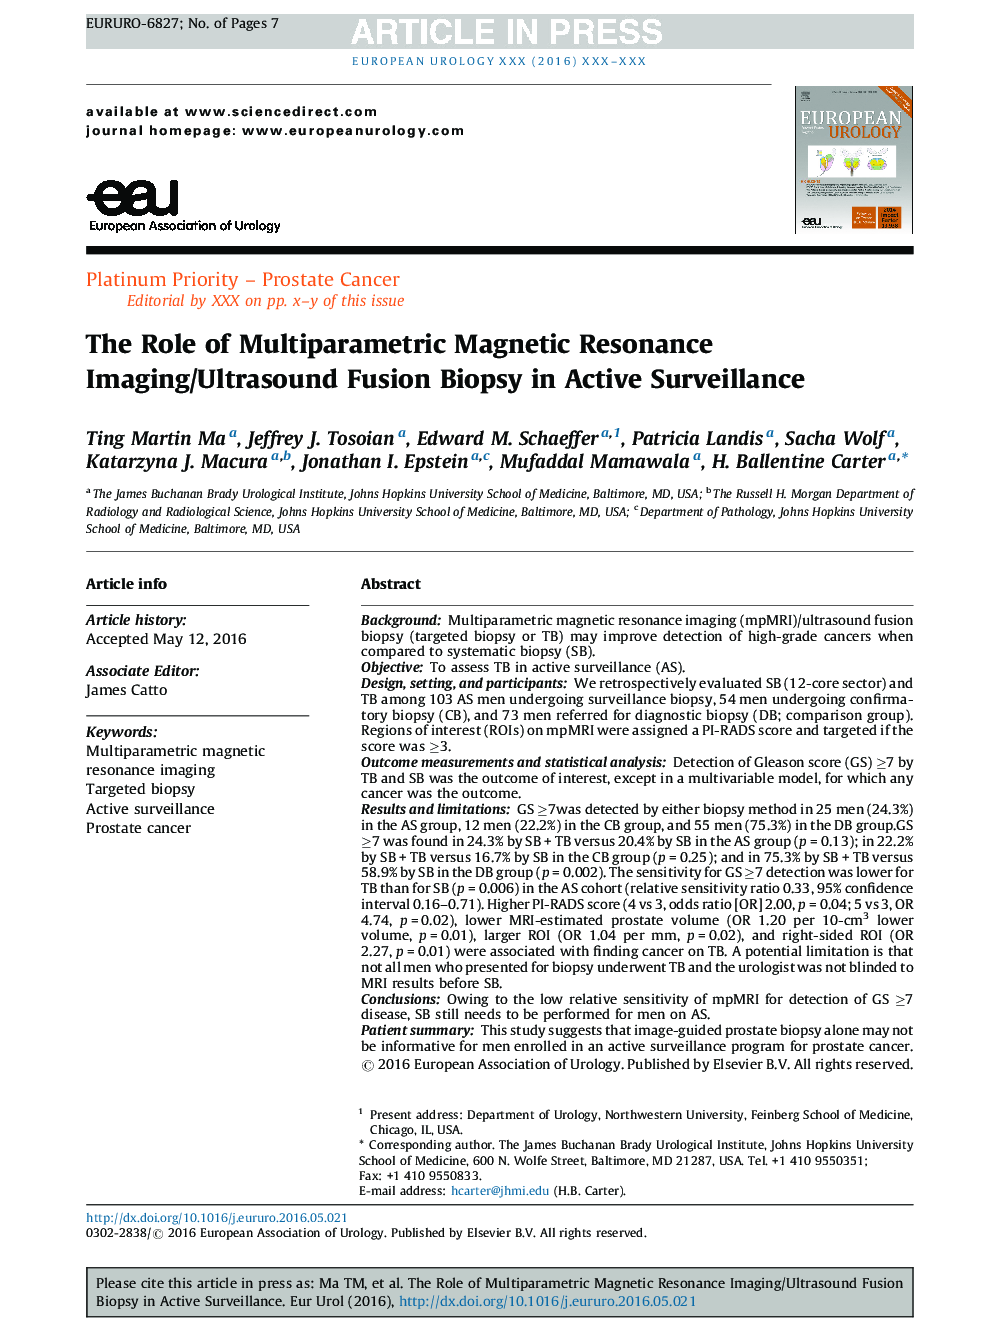 The Role of Multiparametric Magnetic Resonance Imaging/Ultrasound Fusion Biopsy in Active Surveillance